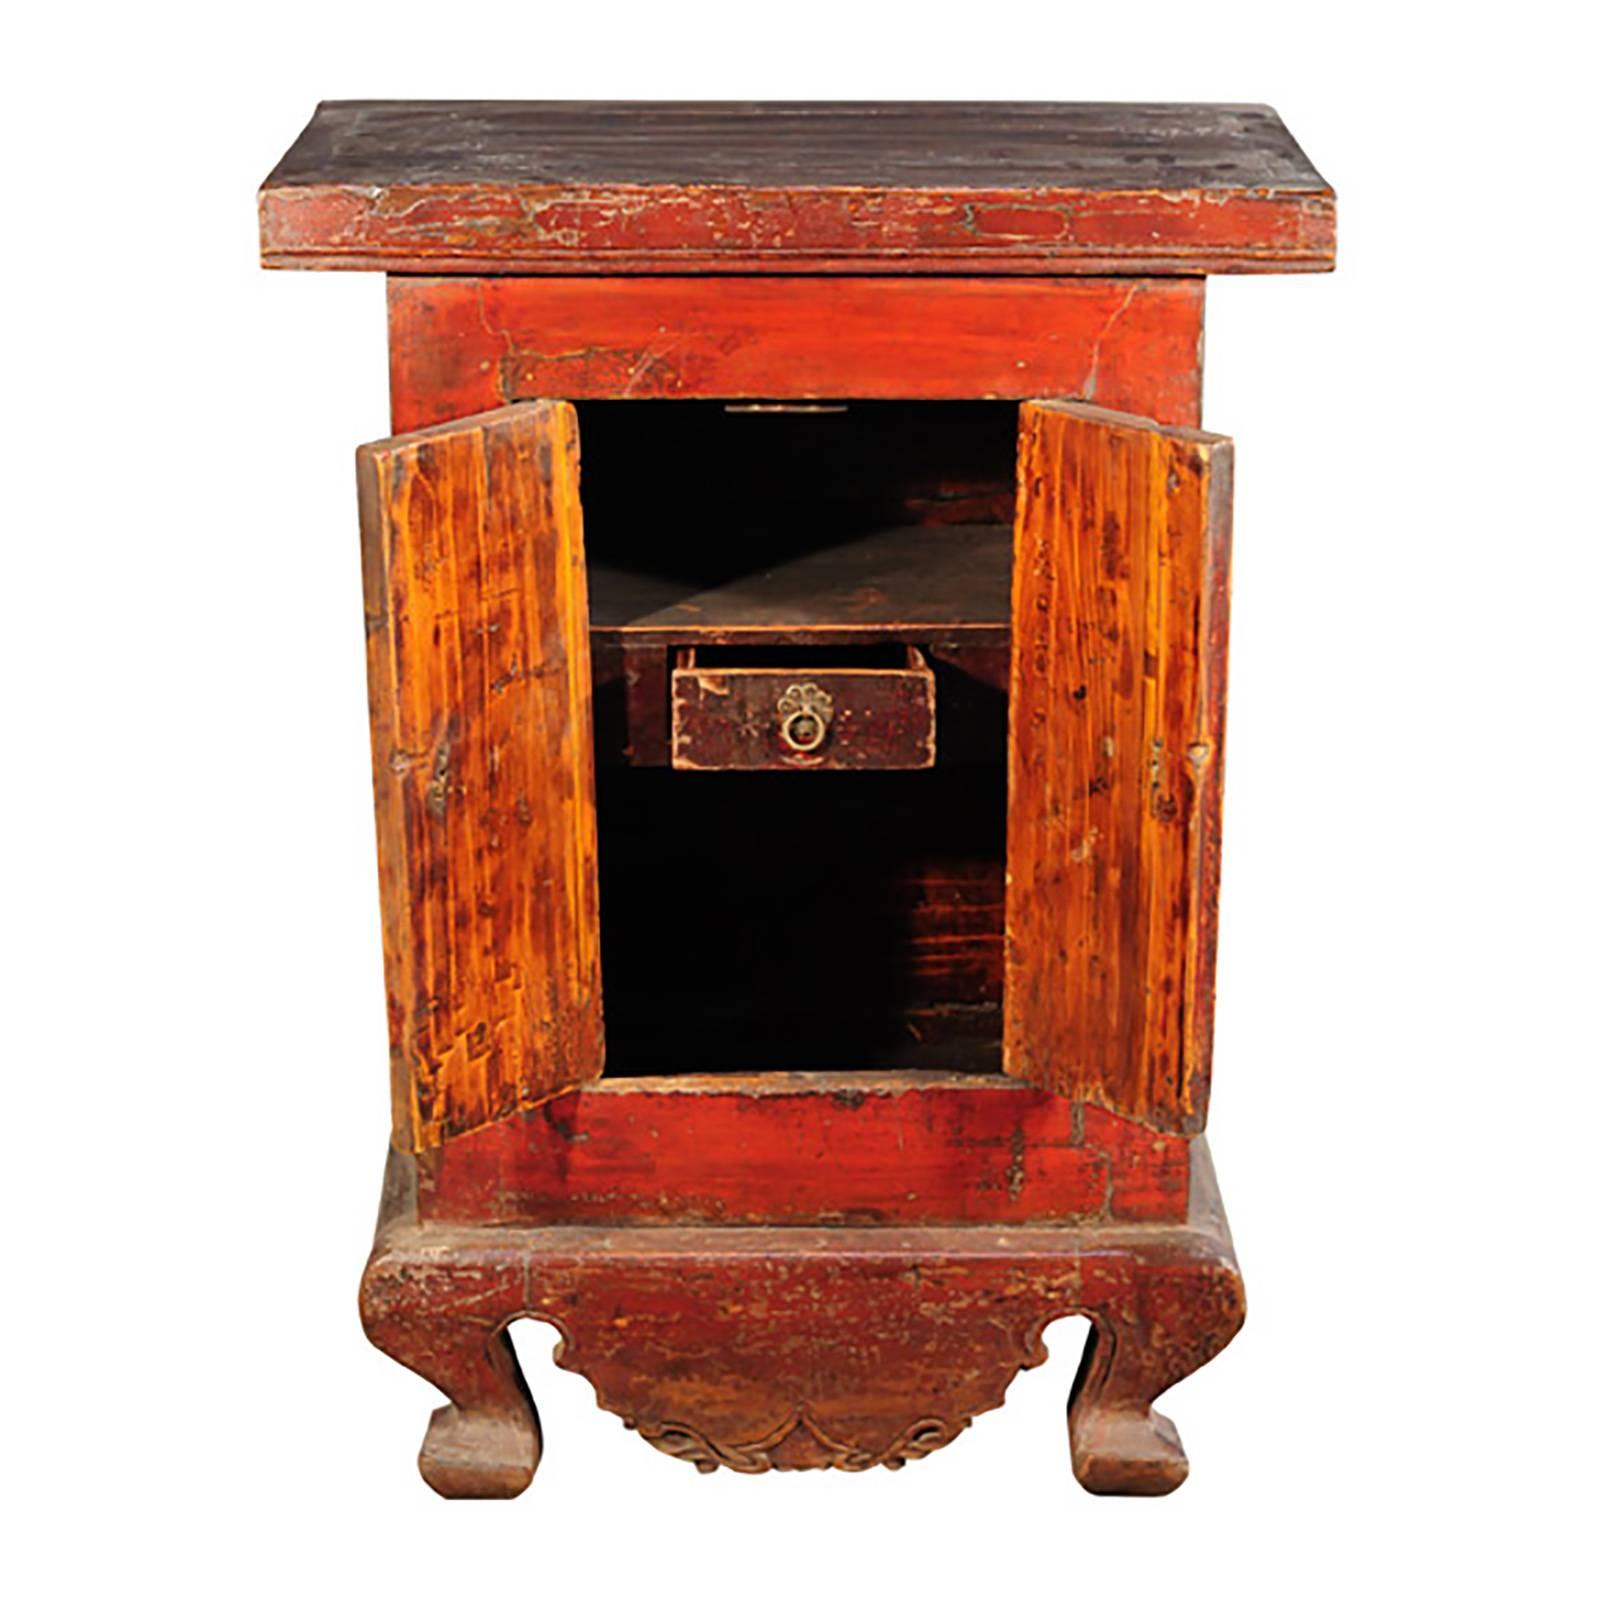 Though rustic through wear, the rich lacquer finish on this petite chest still glows vibrant red. Like many furniture pieces made during the Qing dynasty (1644-1911), the chest, made around 1850, is a charming example of the ways in which artisans